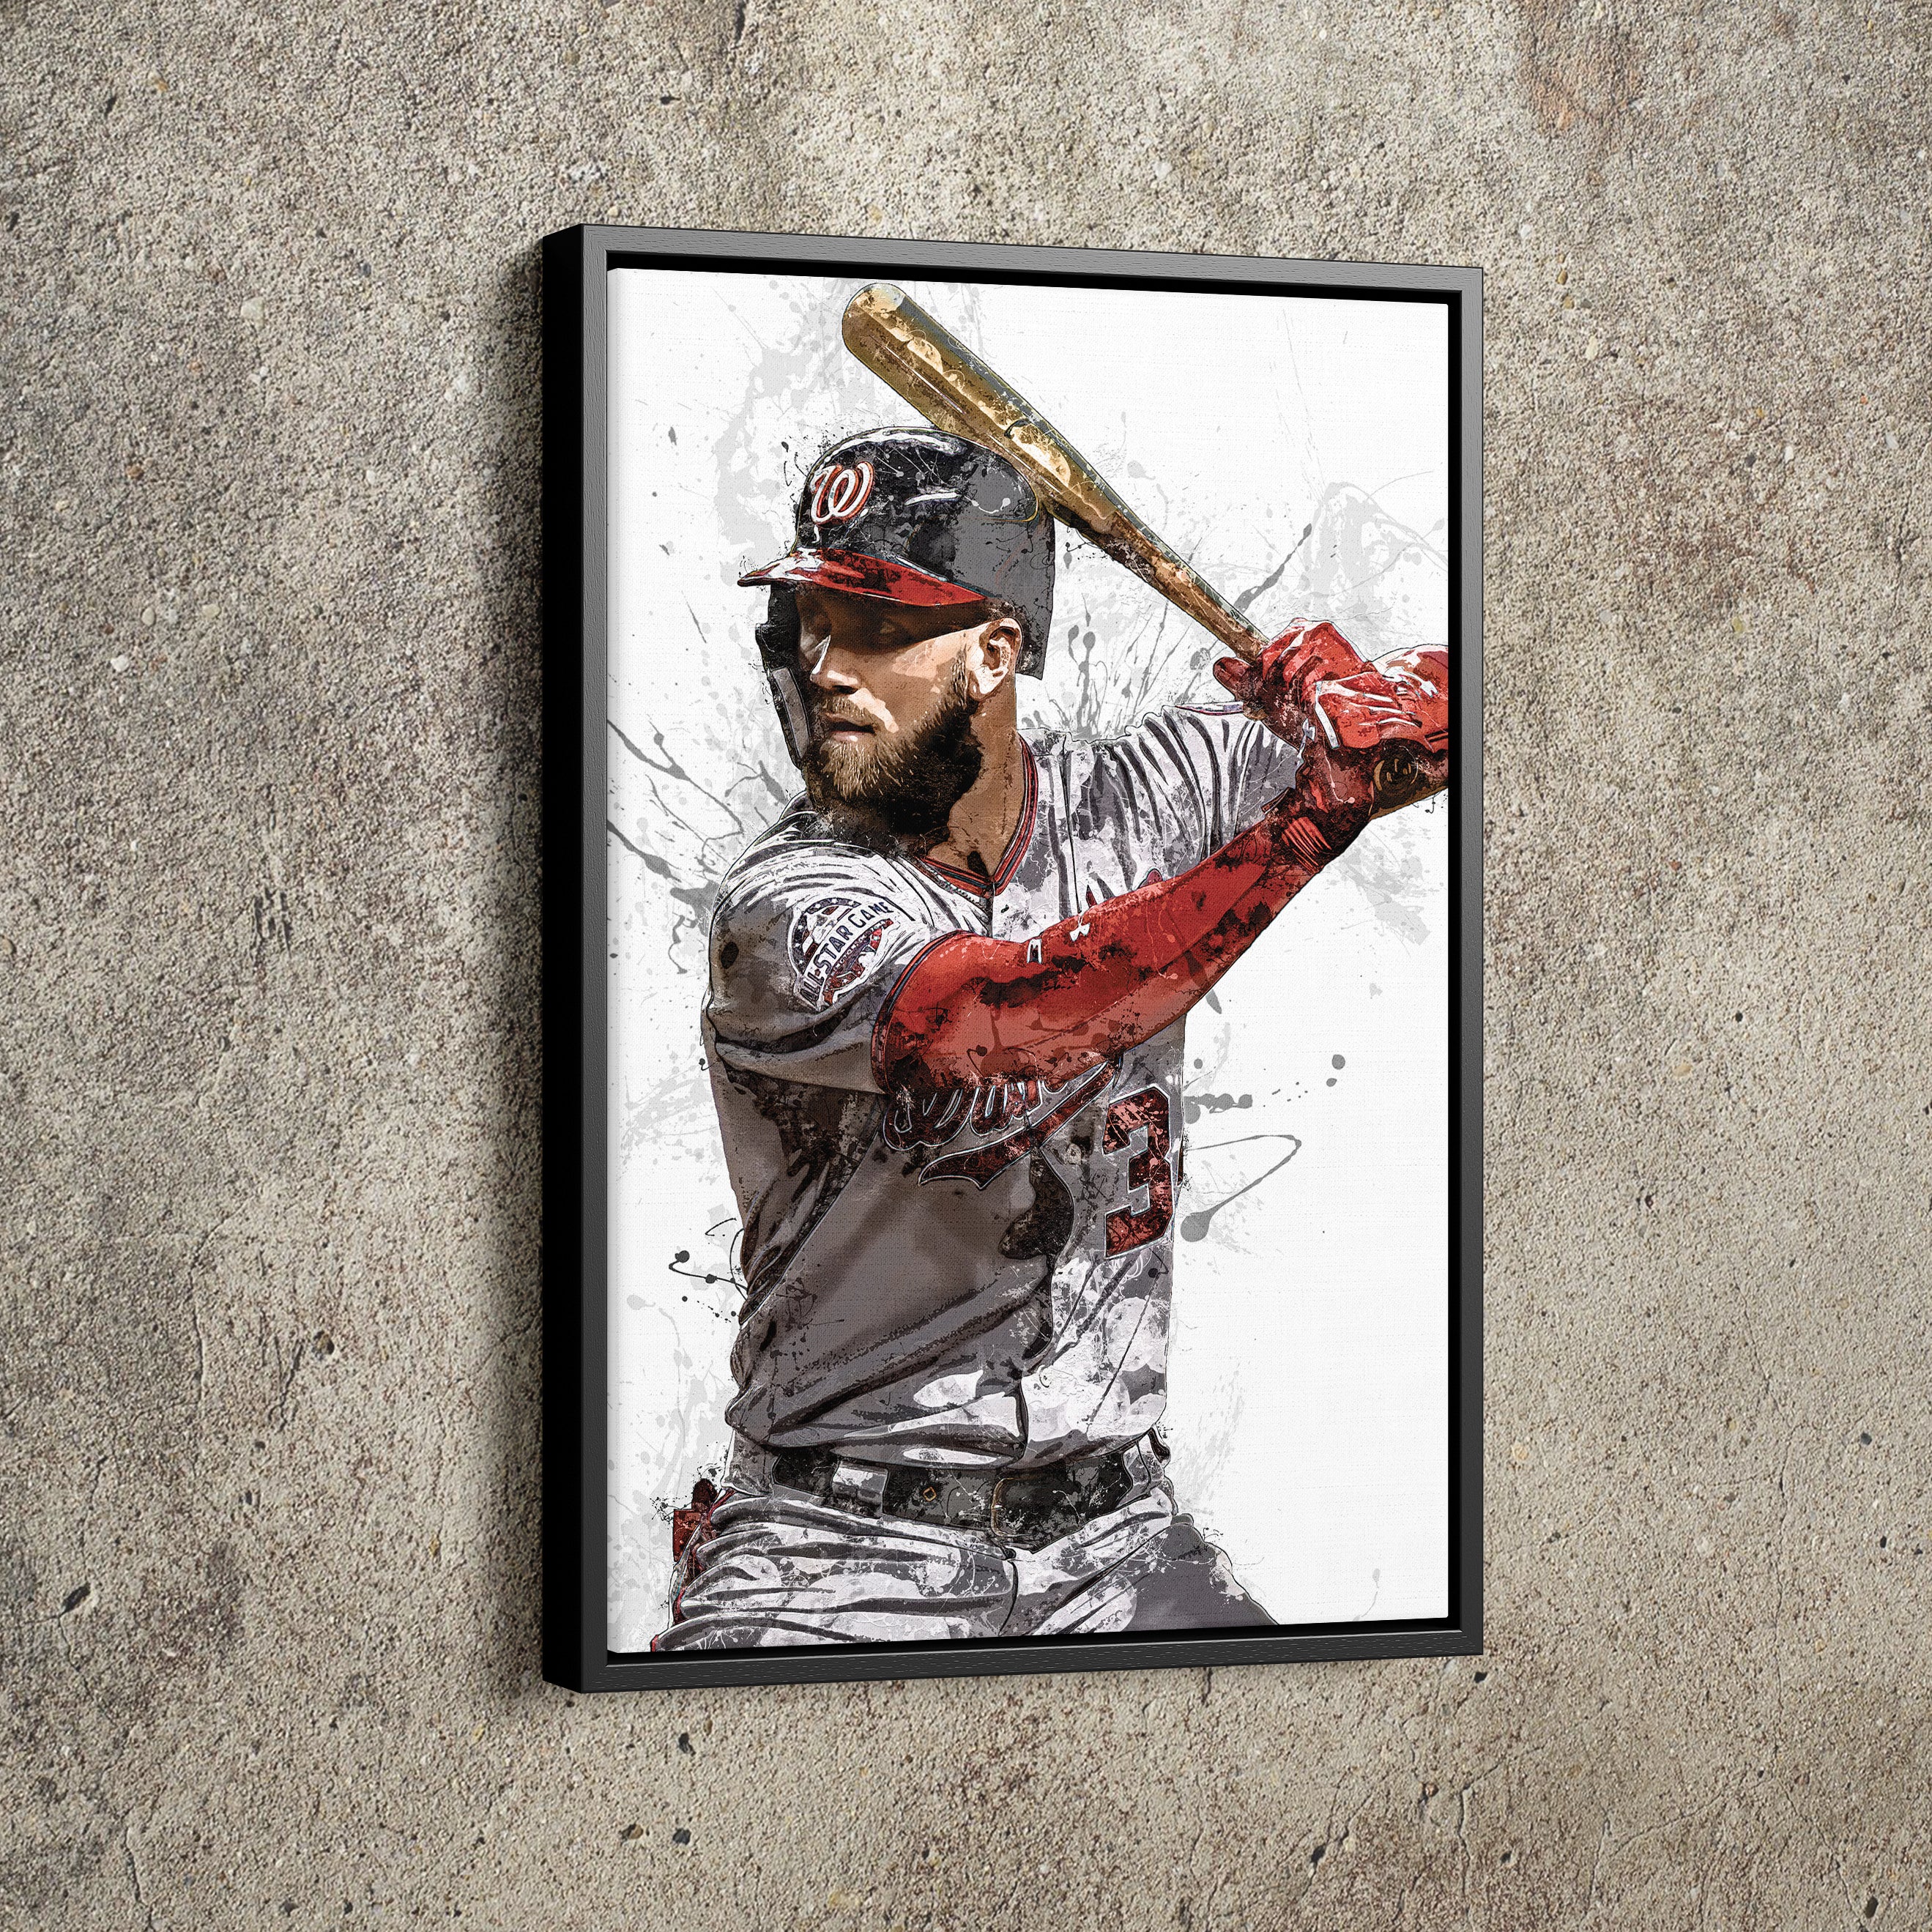 Baseball Pitching Grips Gallery Wrapped Framed Canvas Prints - Unframed  Poster - Home Decor Wall Art